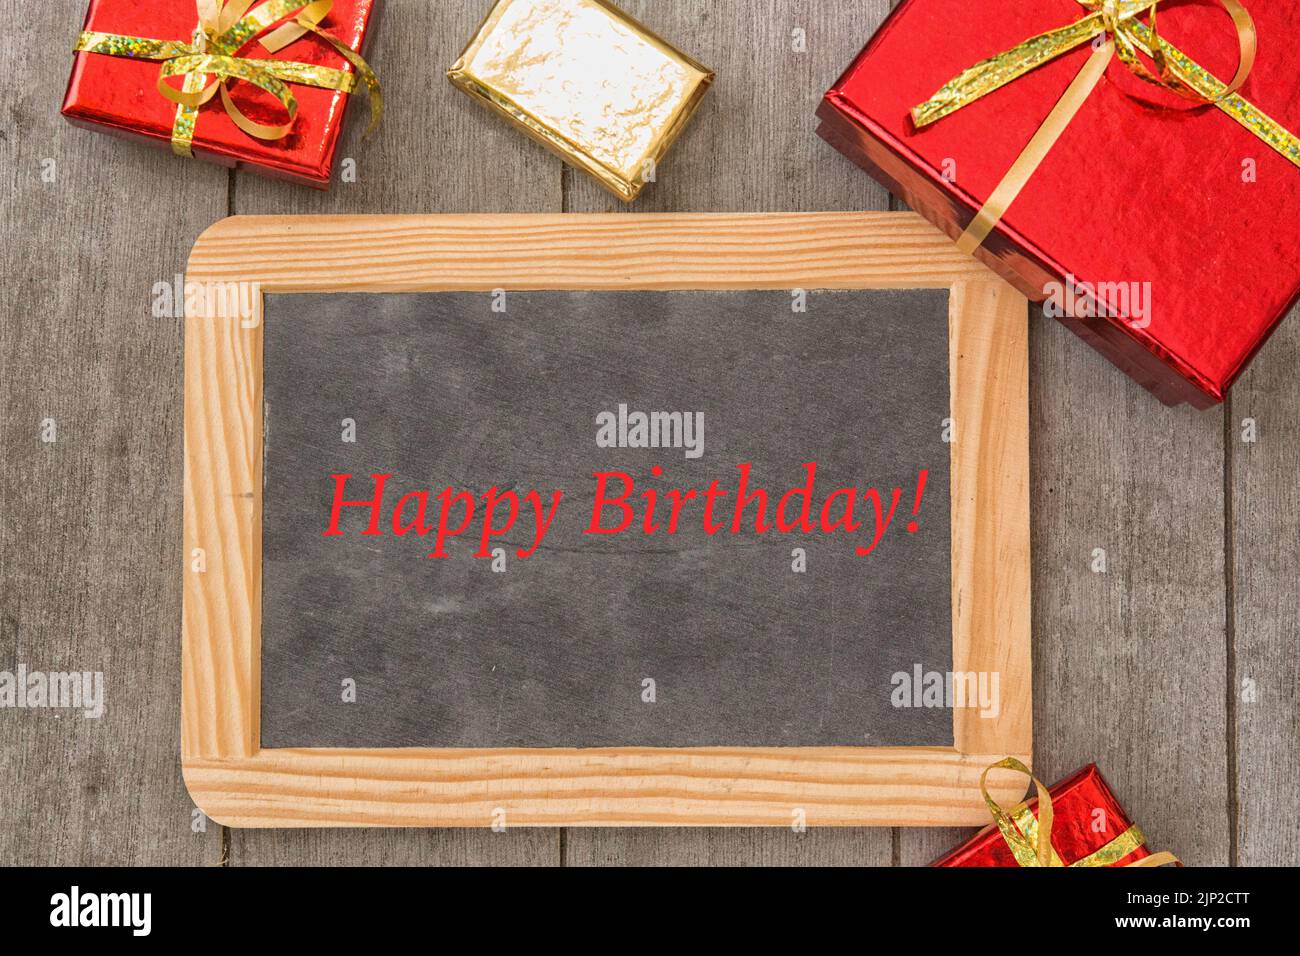 Red and gold gift boxes with over wooden background with blackboard Stock Photo